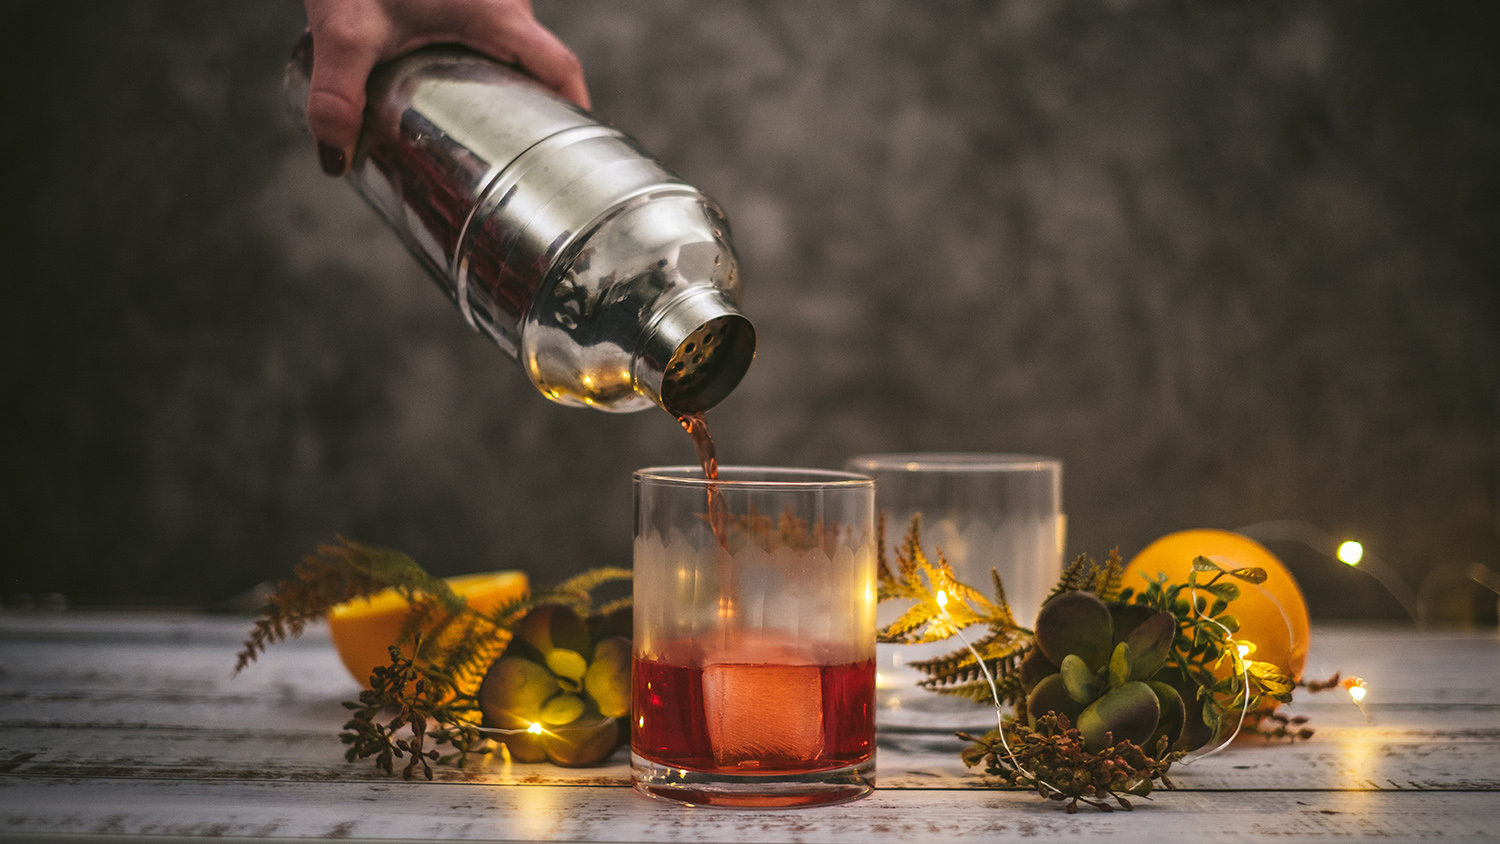 Liquor Gifts - The Best Spirits For The Holidays